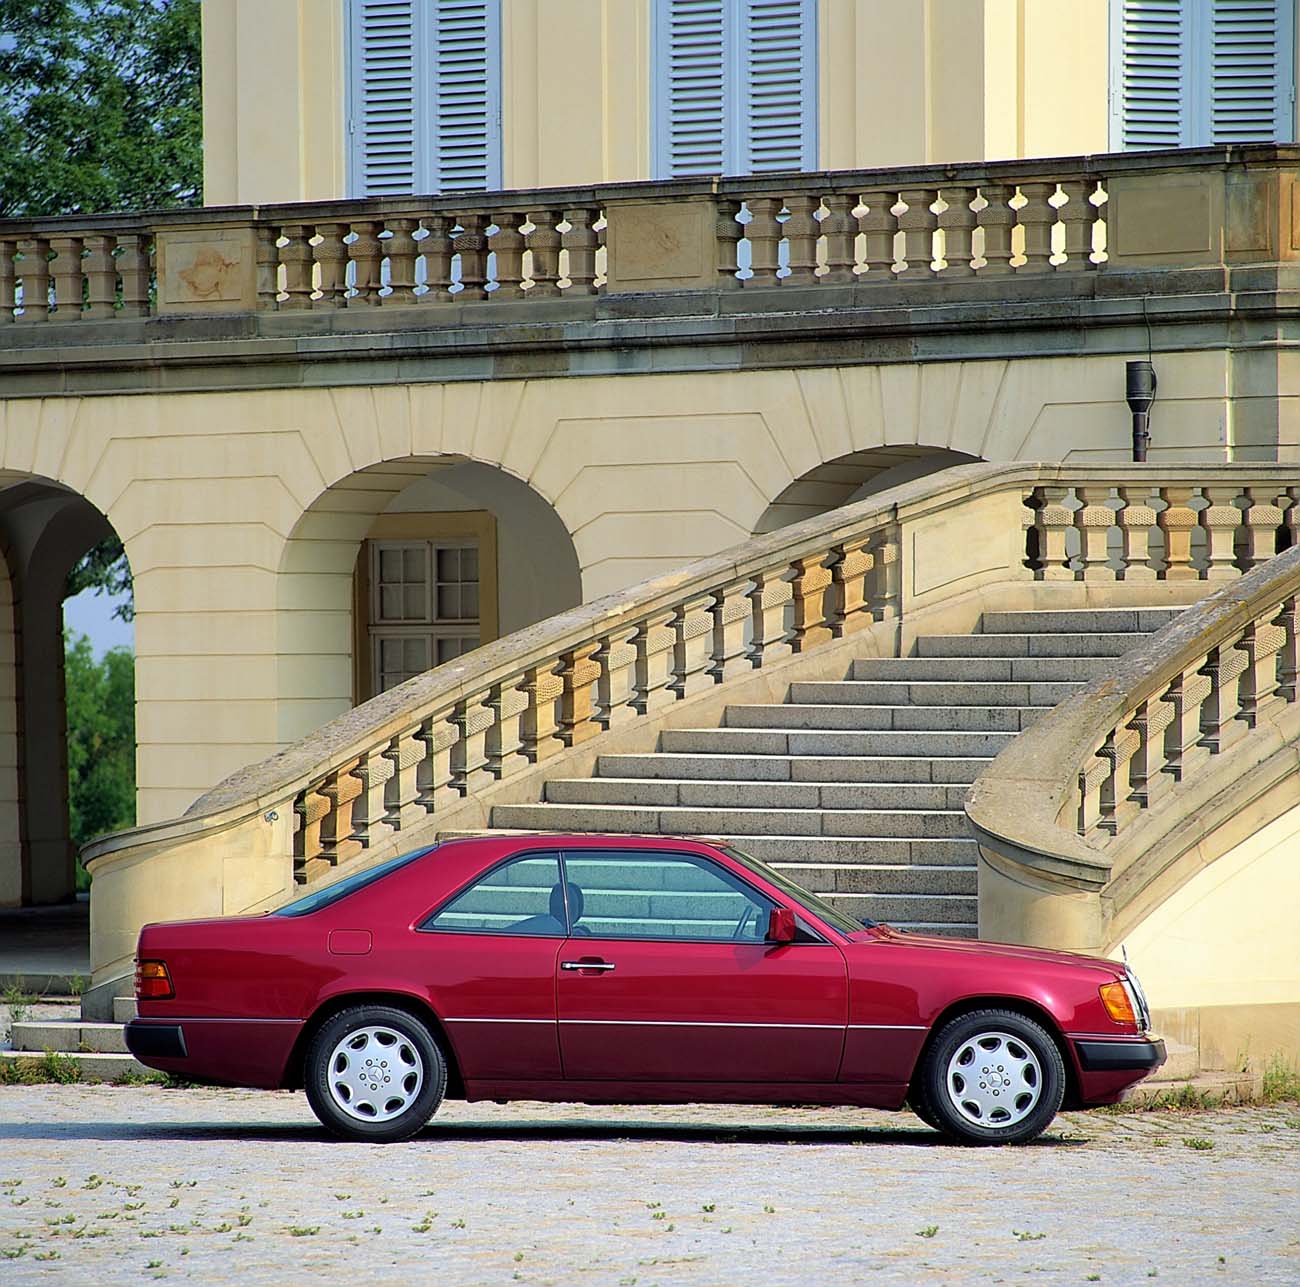 Mercedes-Benz 320 CE (C 124), photo from 1992.